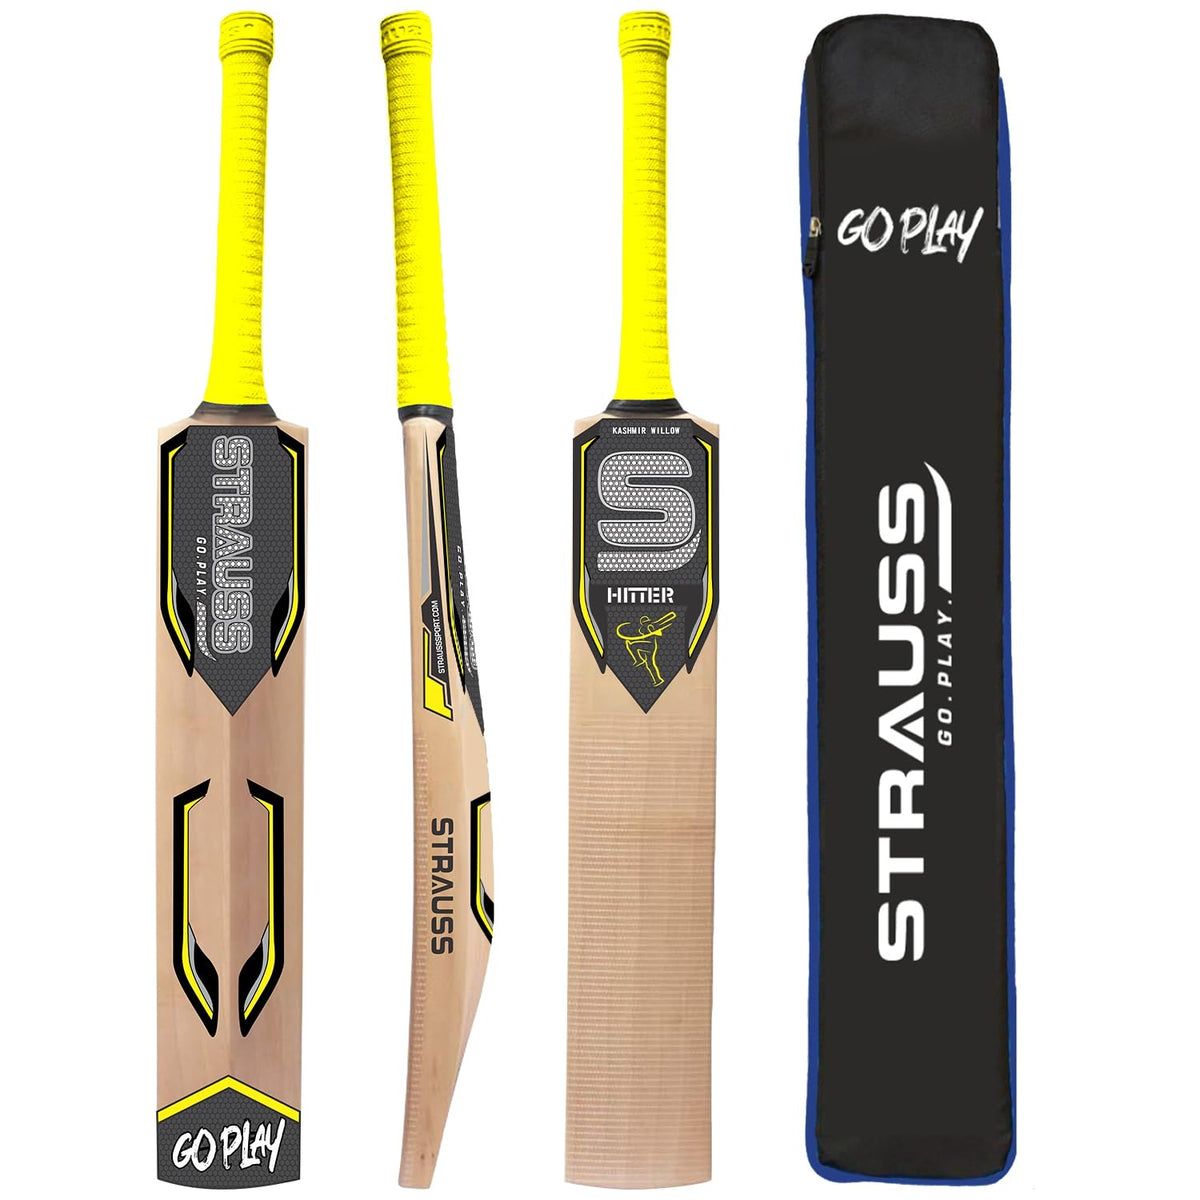 STRAUSS Hitter Kashmir Willow Cricket Bat |Size: Short Hand |Suitable for Tennis Ball |Yellow| Ideal for Boys/Youth/Adults (1050-1200 Grams)